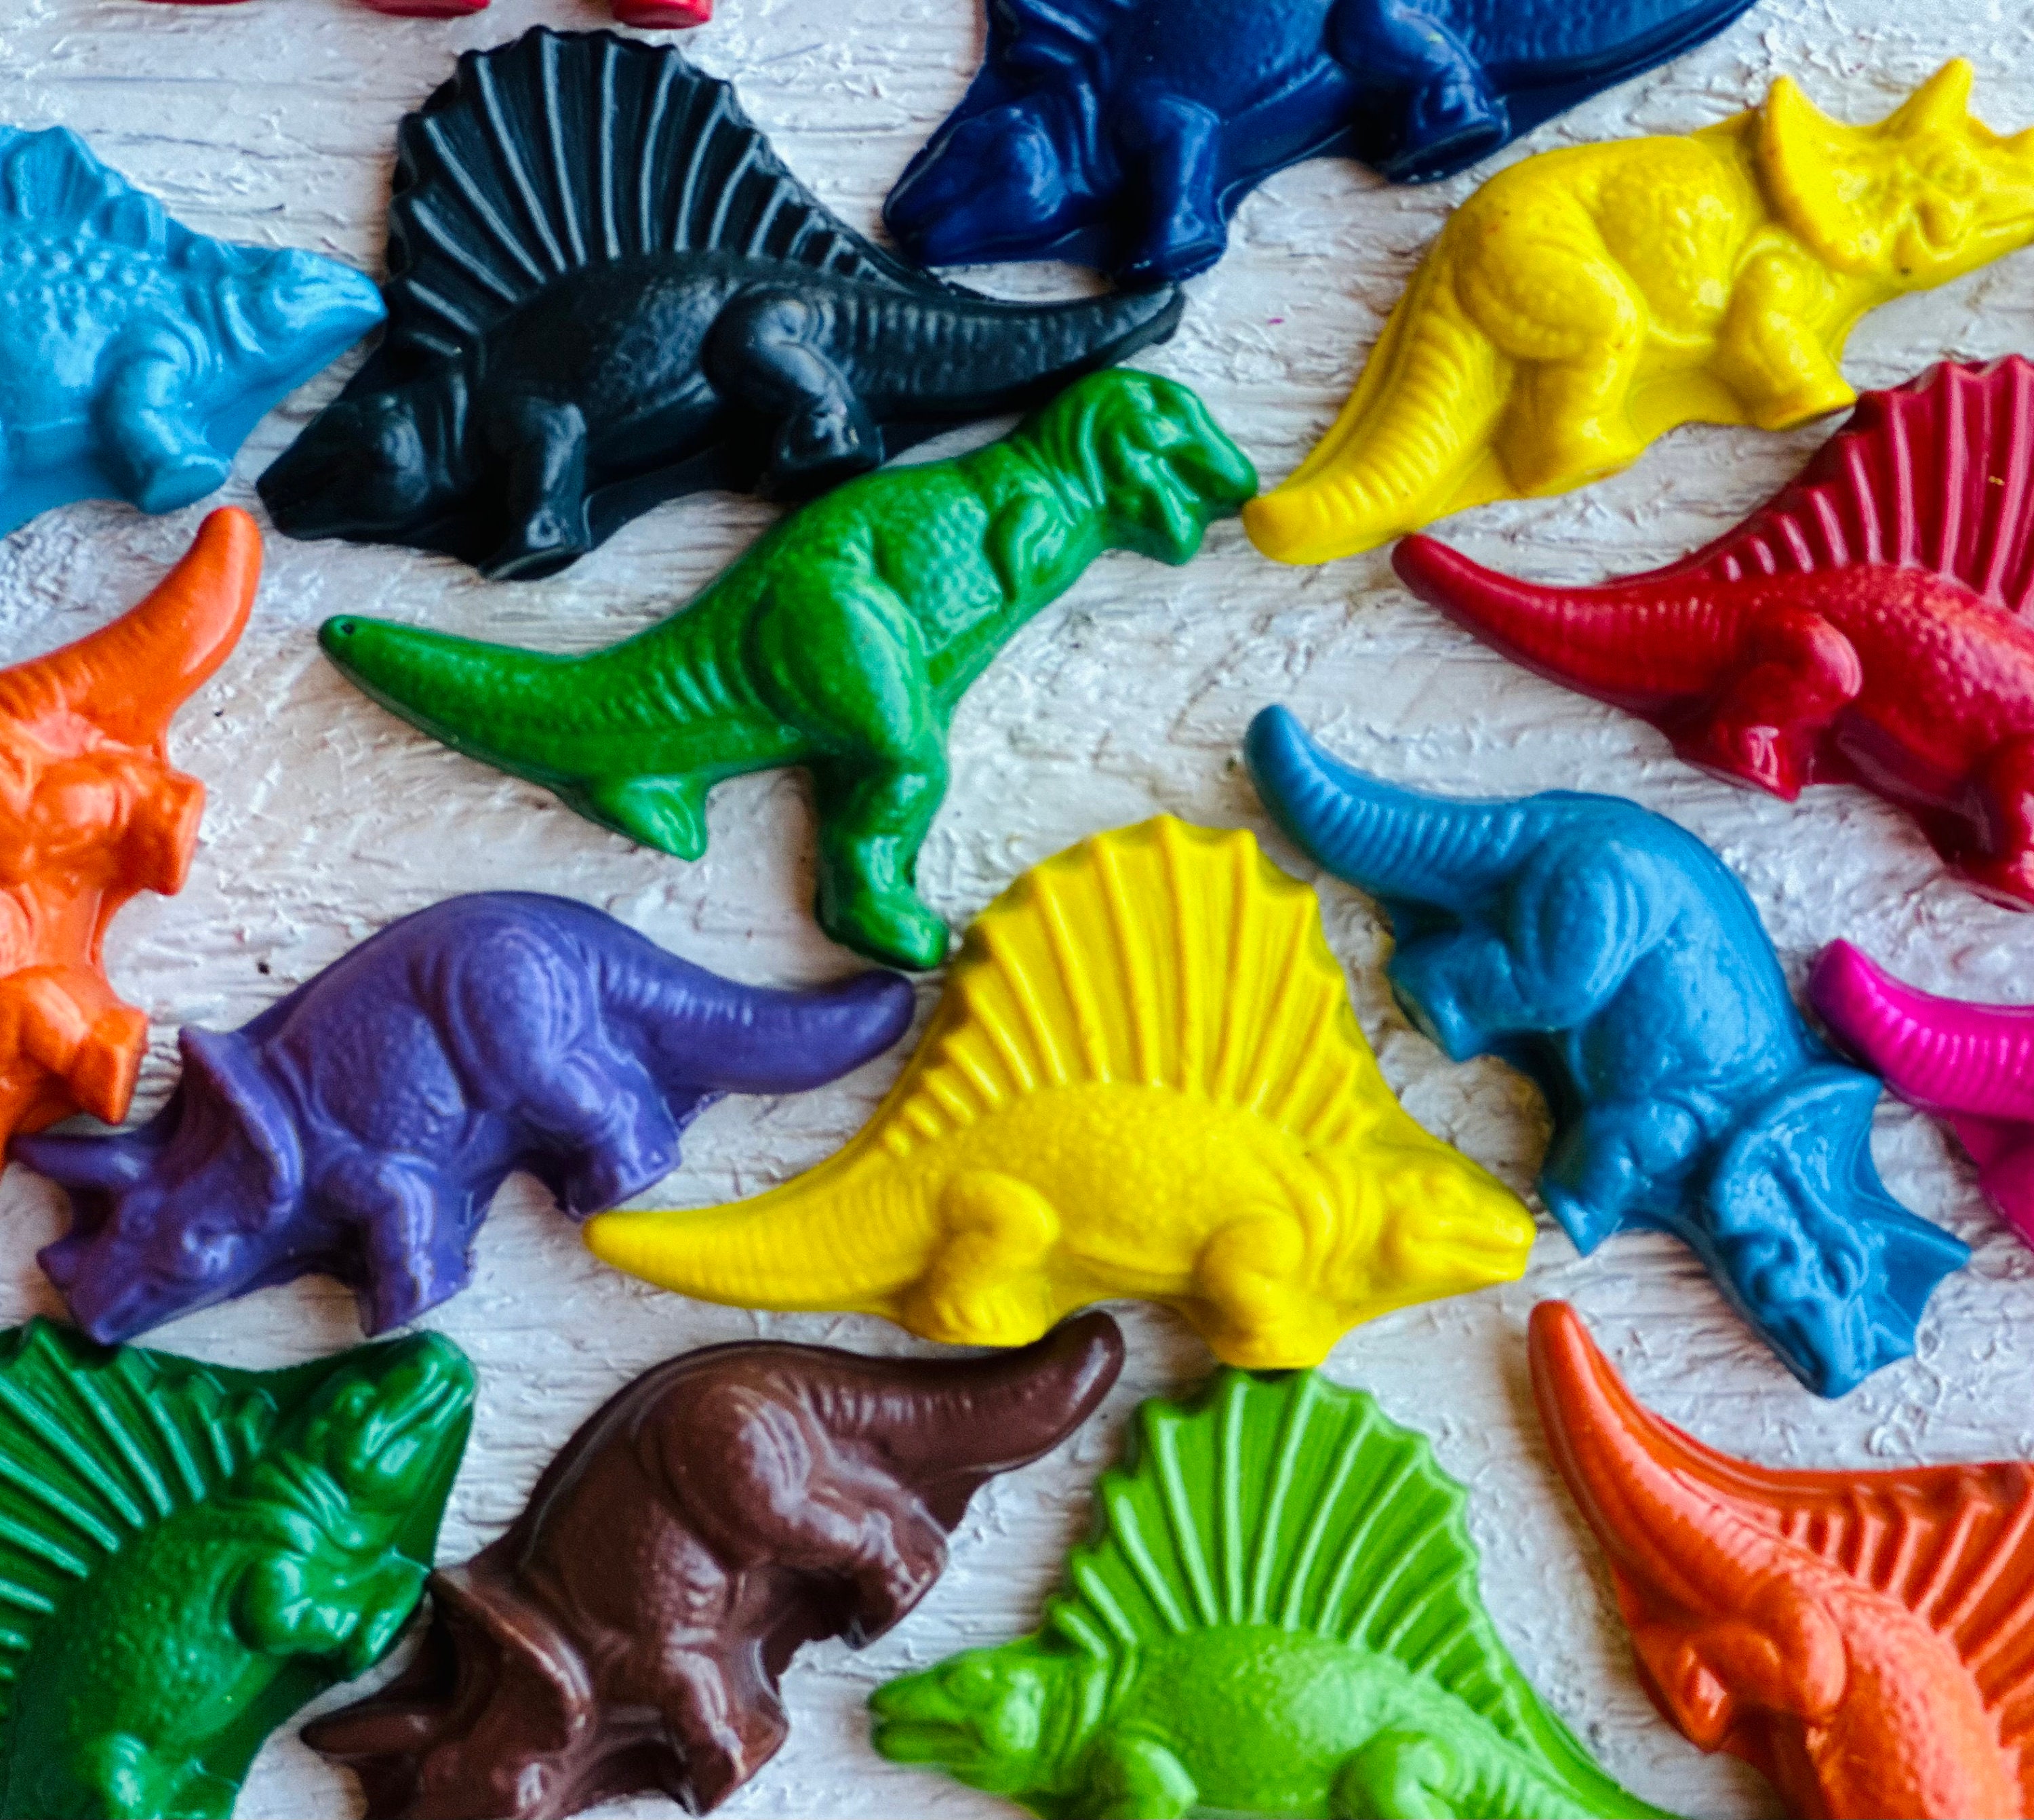 Dinosaur crayons for my son's “Two-Rex” birthday party! 🦖🖍️ these we, Dinosaur